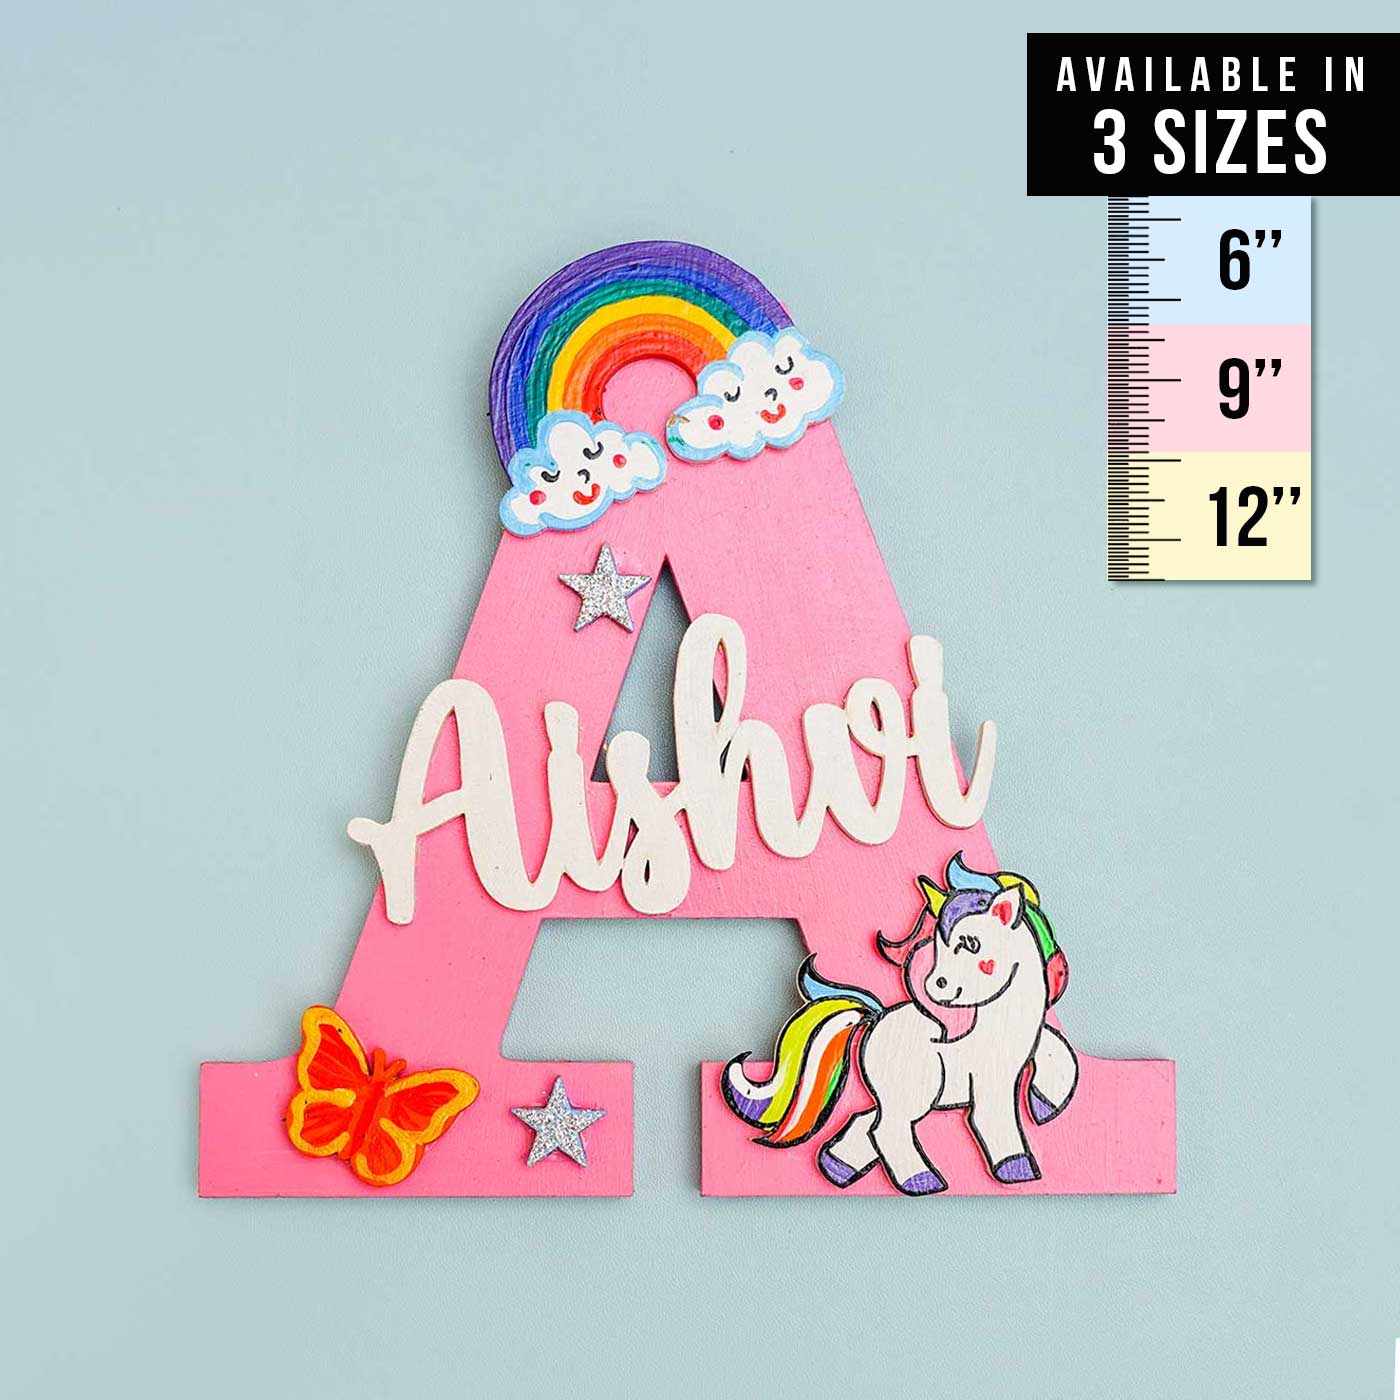 Vinmot Unicorn Stationery Set with 5 Unicorn LED Light Pens for Birthday  and Return Gift 16 Pieces Online in India, Buy at Best Price from  Firstcry.com - 11496897